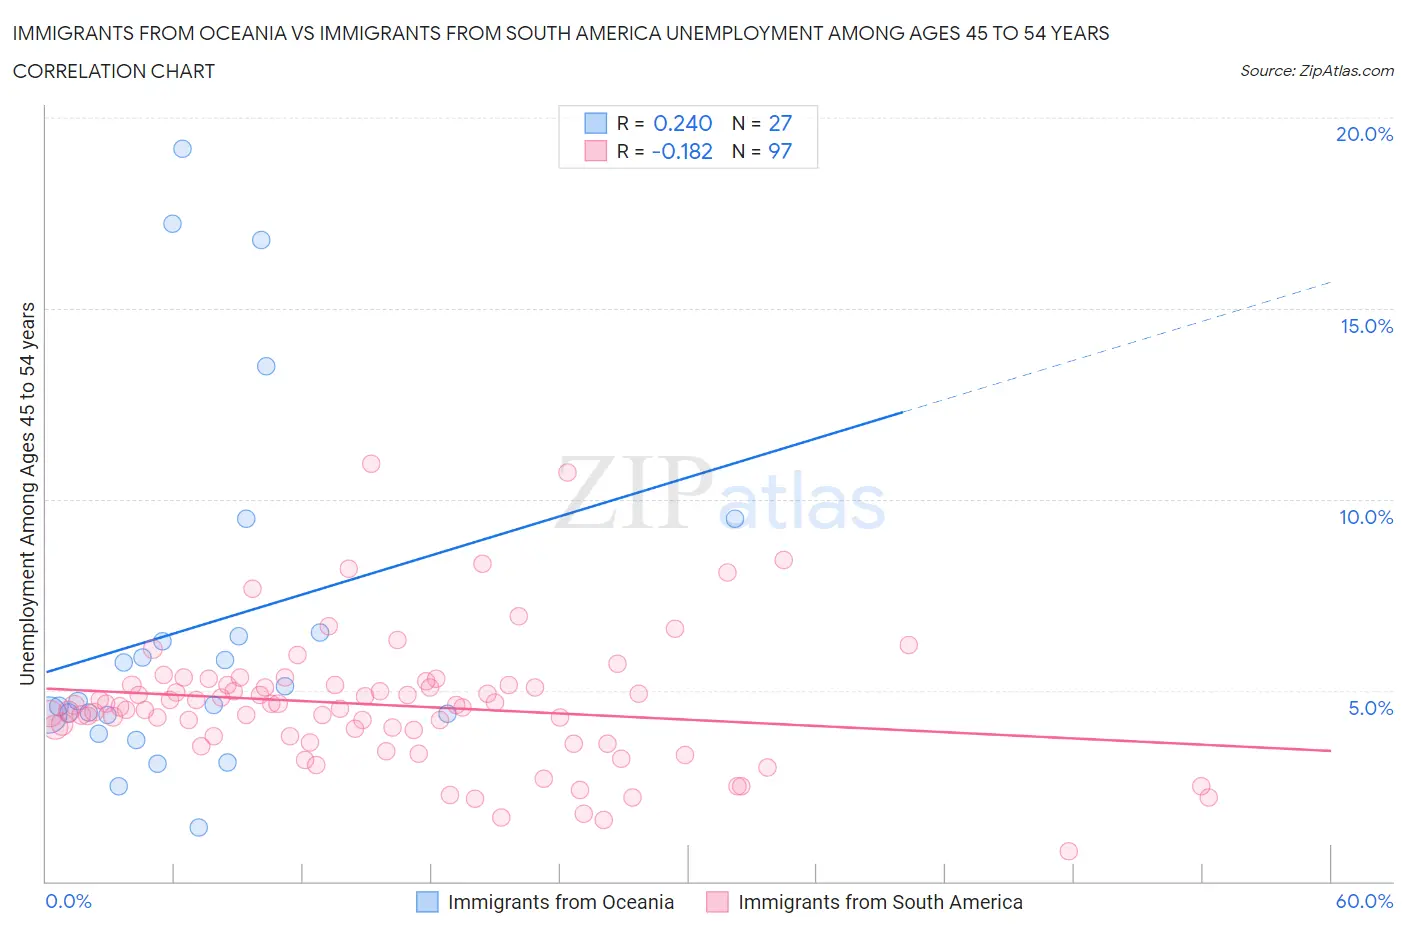 Immigrants from Oceania vs Immigrants from South America Unemployment Among Ages 45 to 54 years